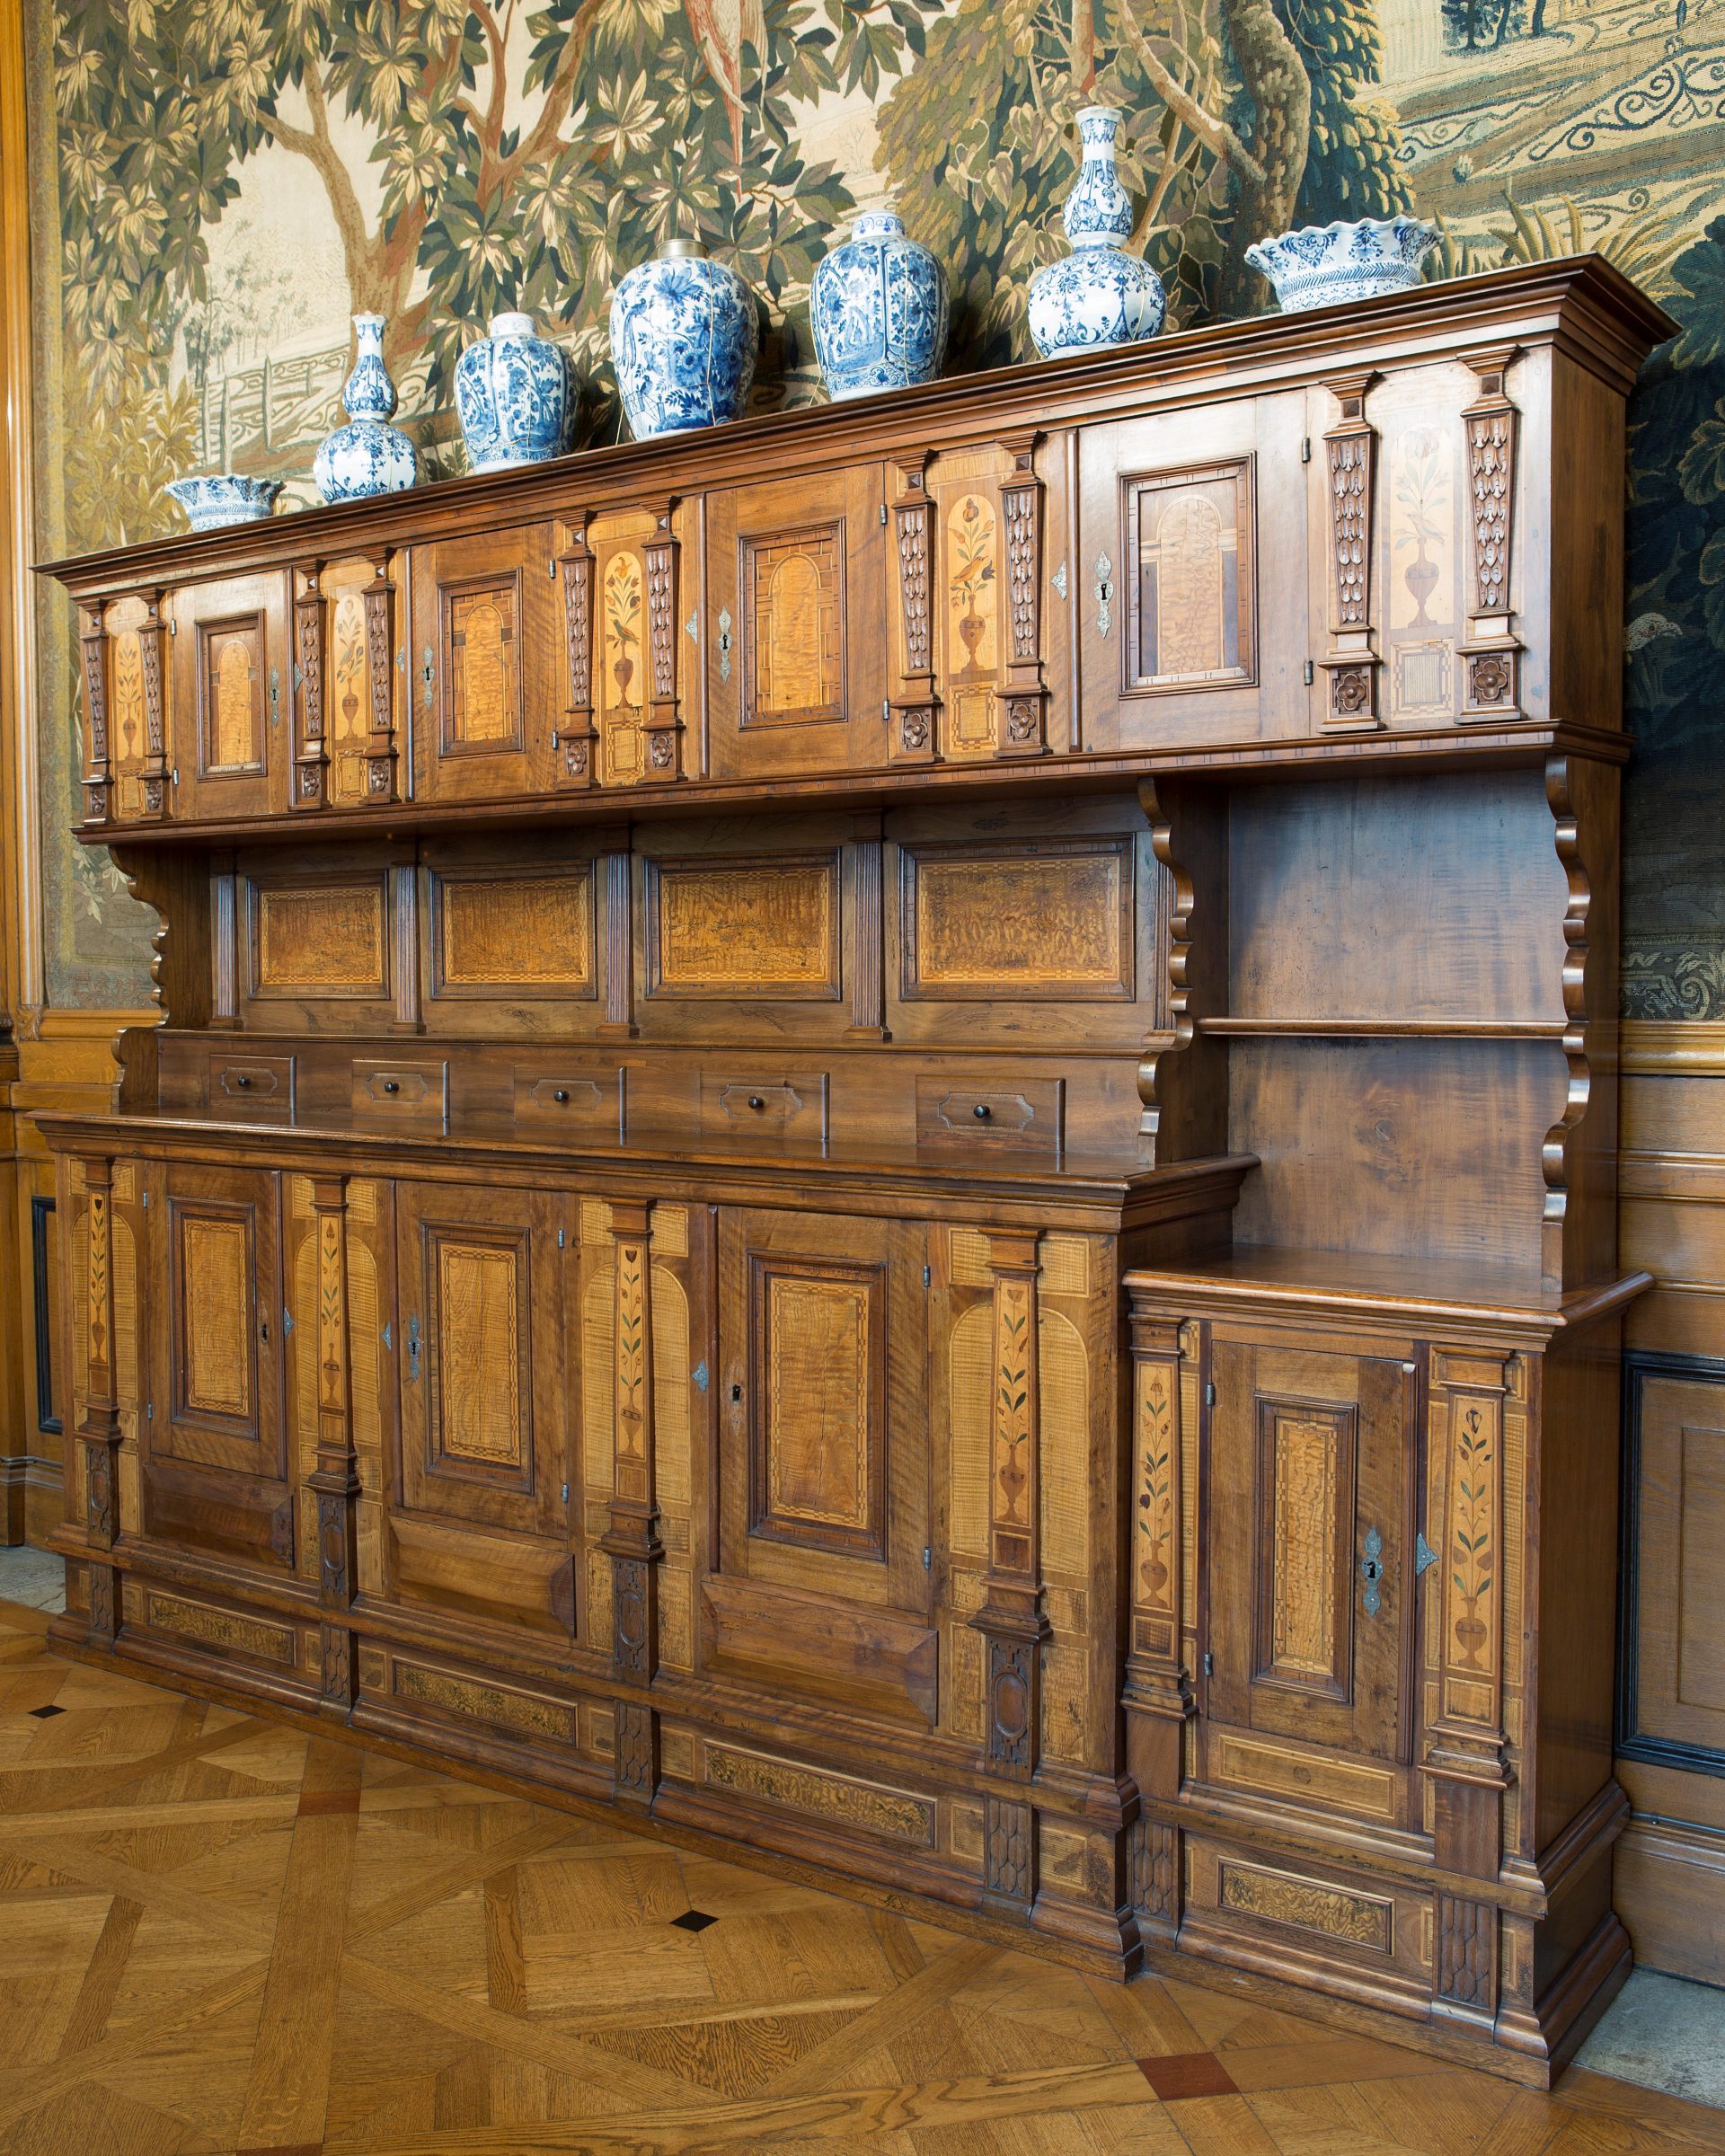 A wooden cabinet with several doors.